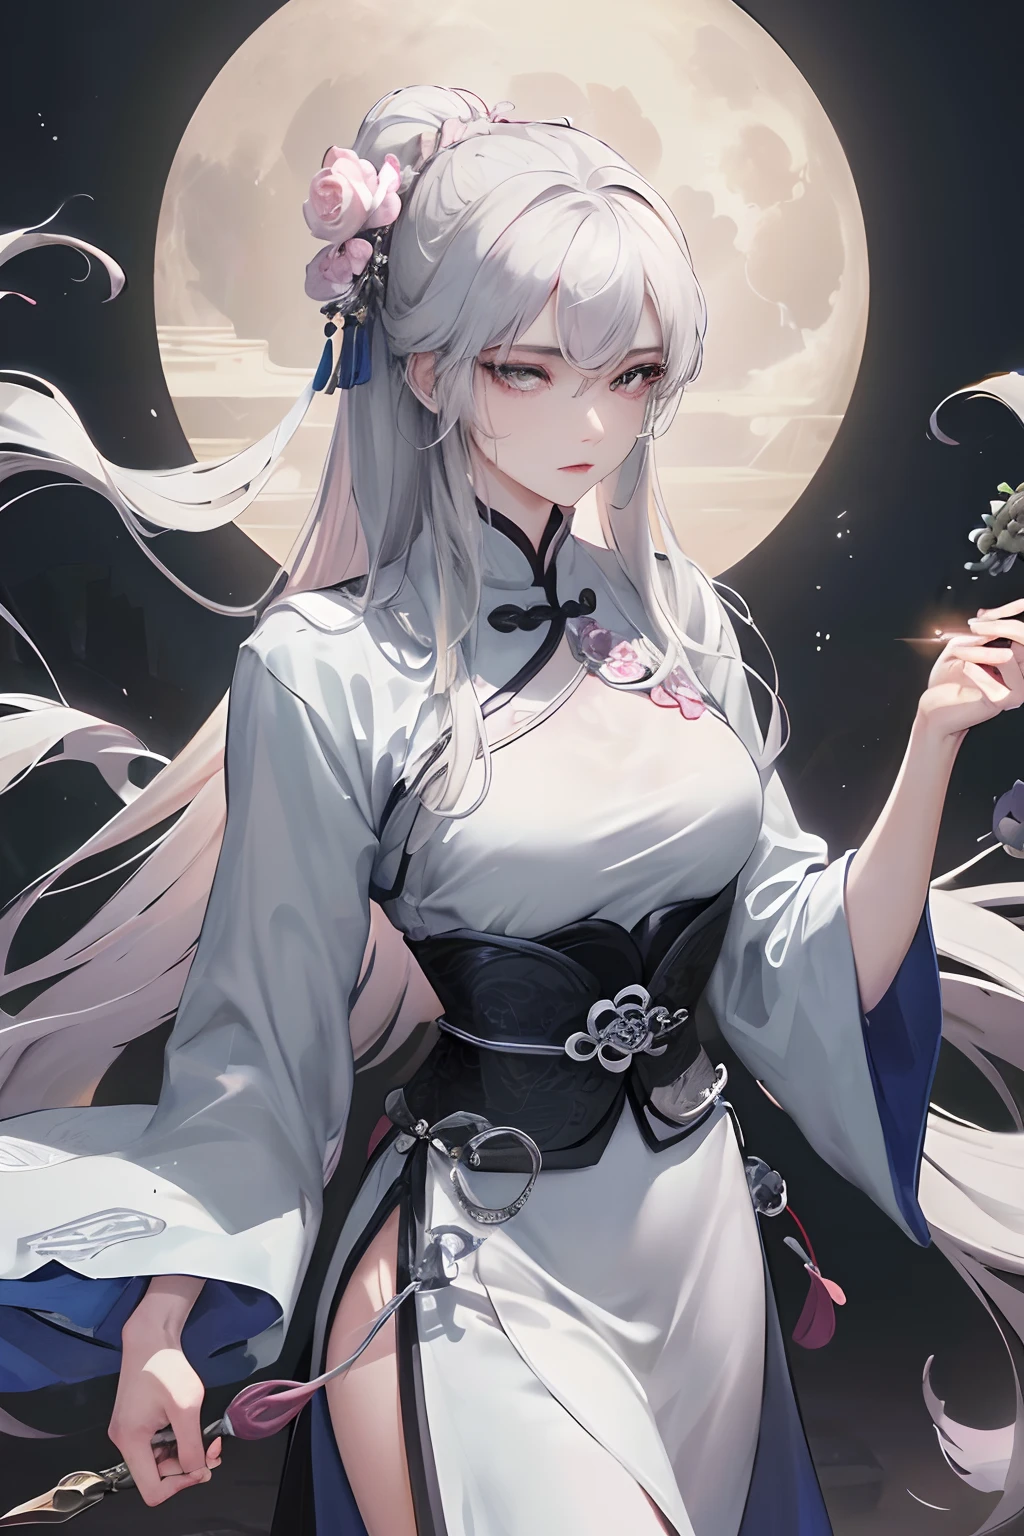 Masterpiece, Best Quality, Night, Full Moon, 1 Girl, Mature Woman, Chinese Style, Ancient China, Sister, Royal Sister, Cold expression, expressionless face, Silver white long haired woman, Light pink lips, Calm, Intellectual, Three belts, Gray pupils, Assassin, Short knife, Flower ball background, Strolling in the street scenery